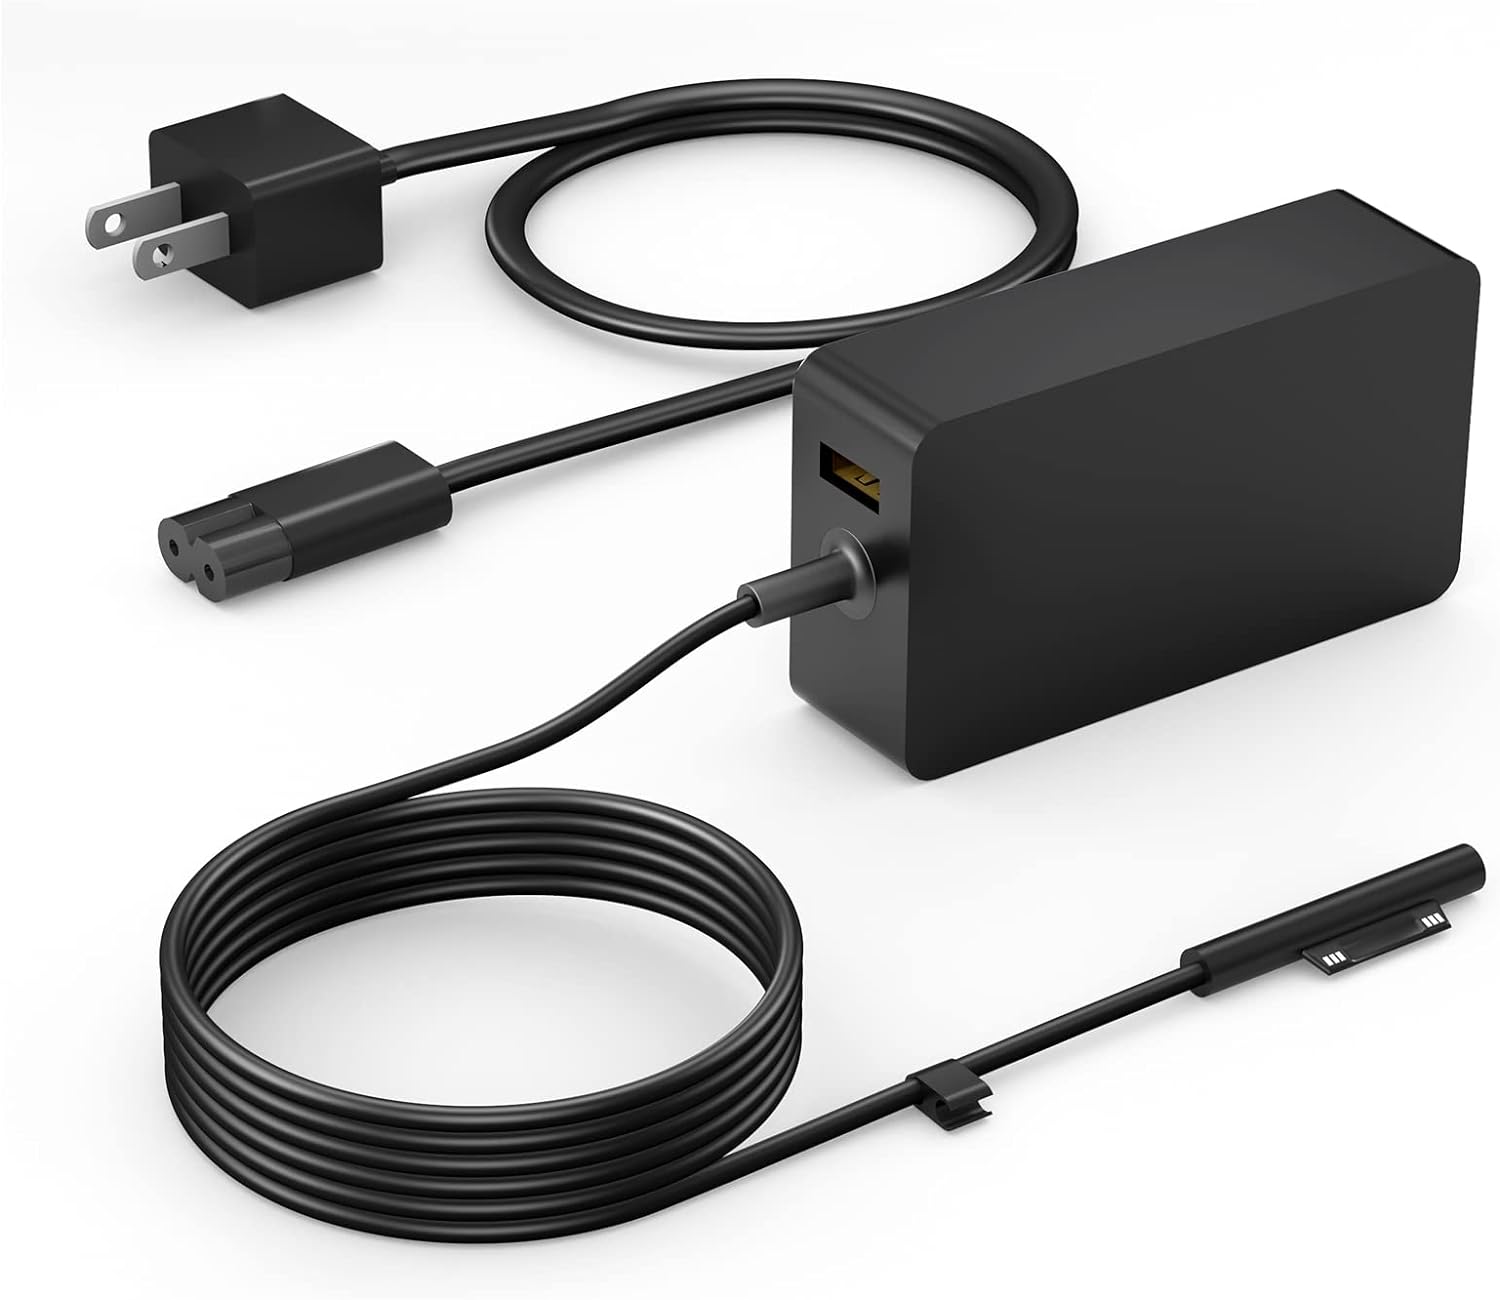 Last Chance! Surface Pro Charger 65W - Unlock Savings of 24% and Grab It Now!